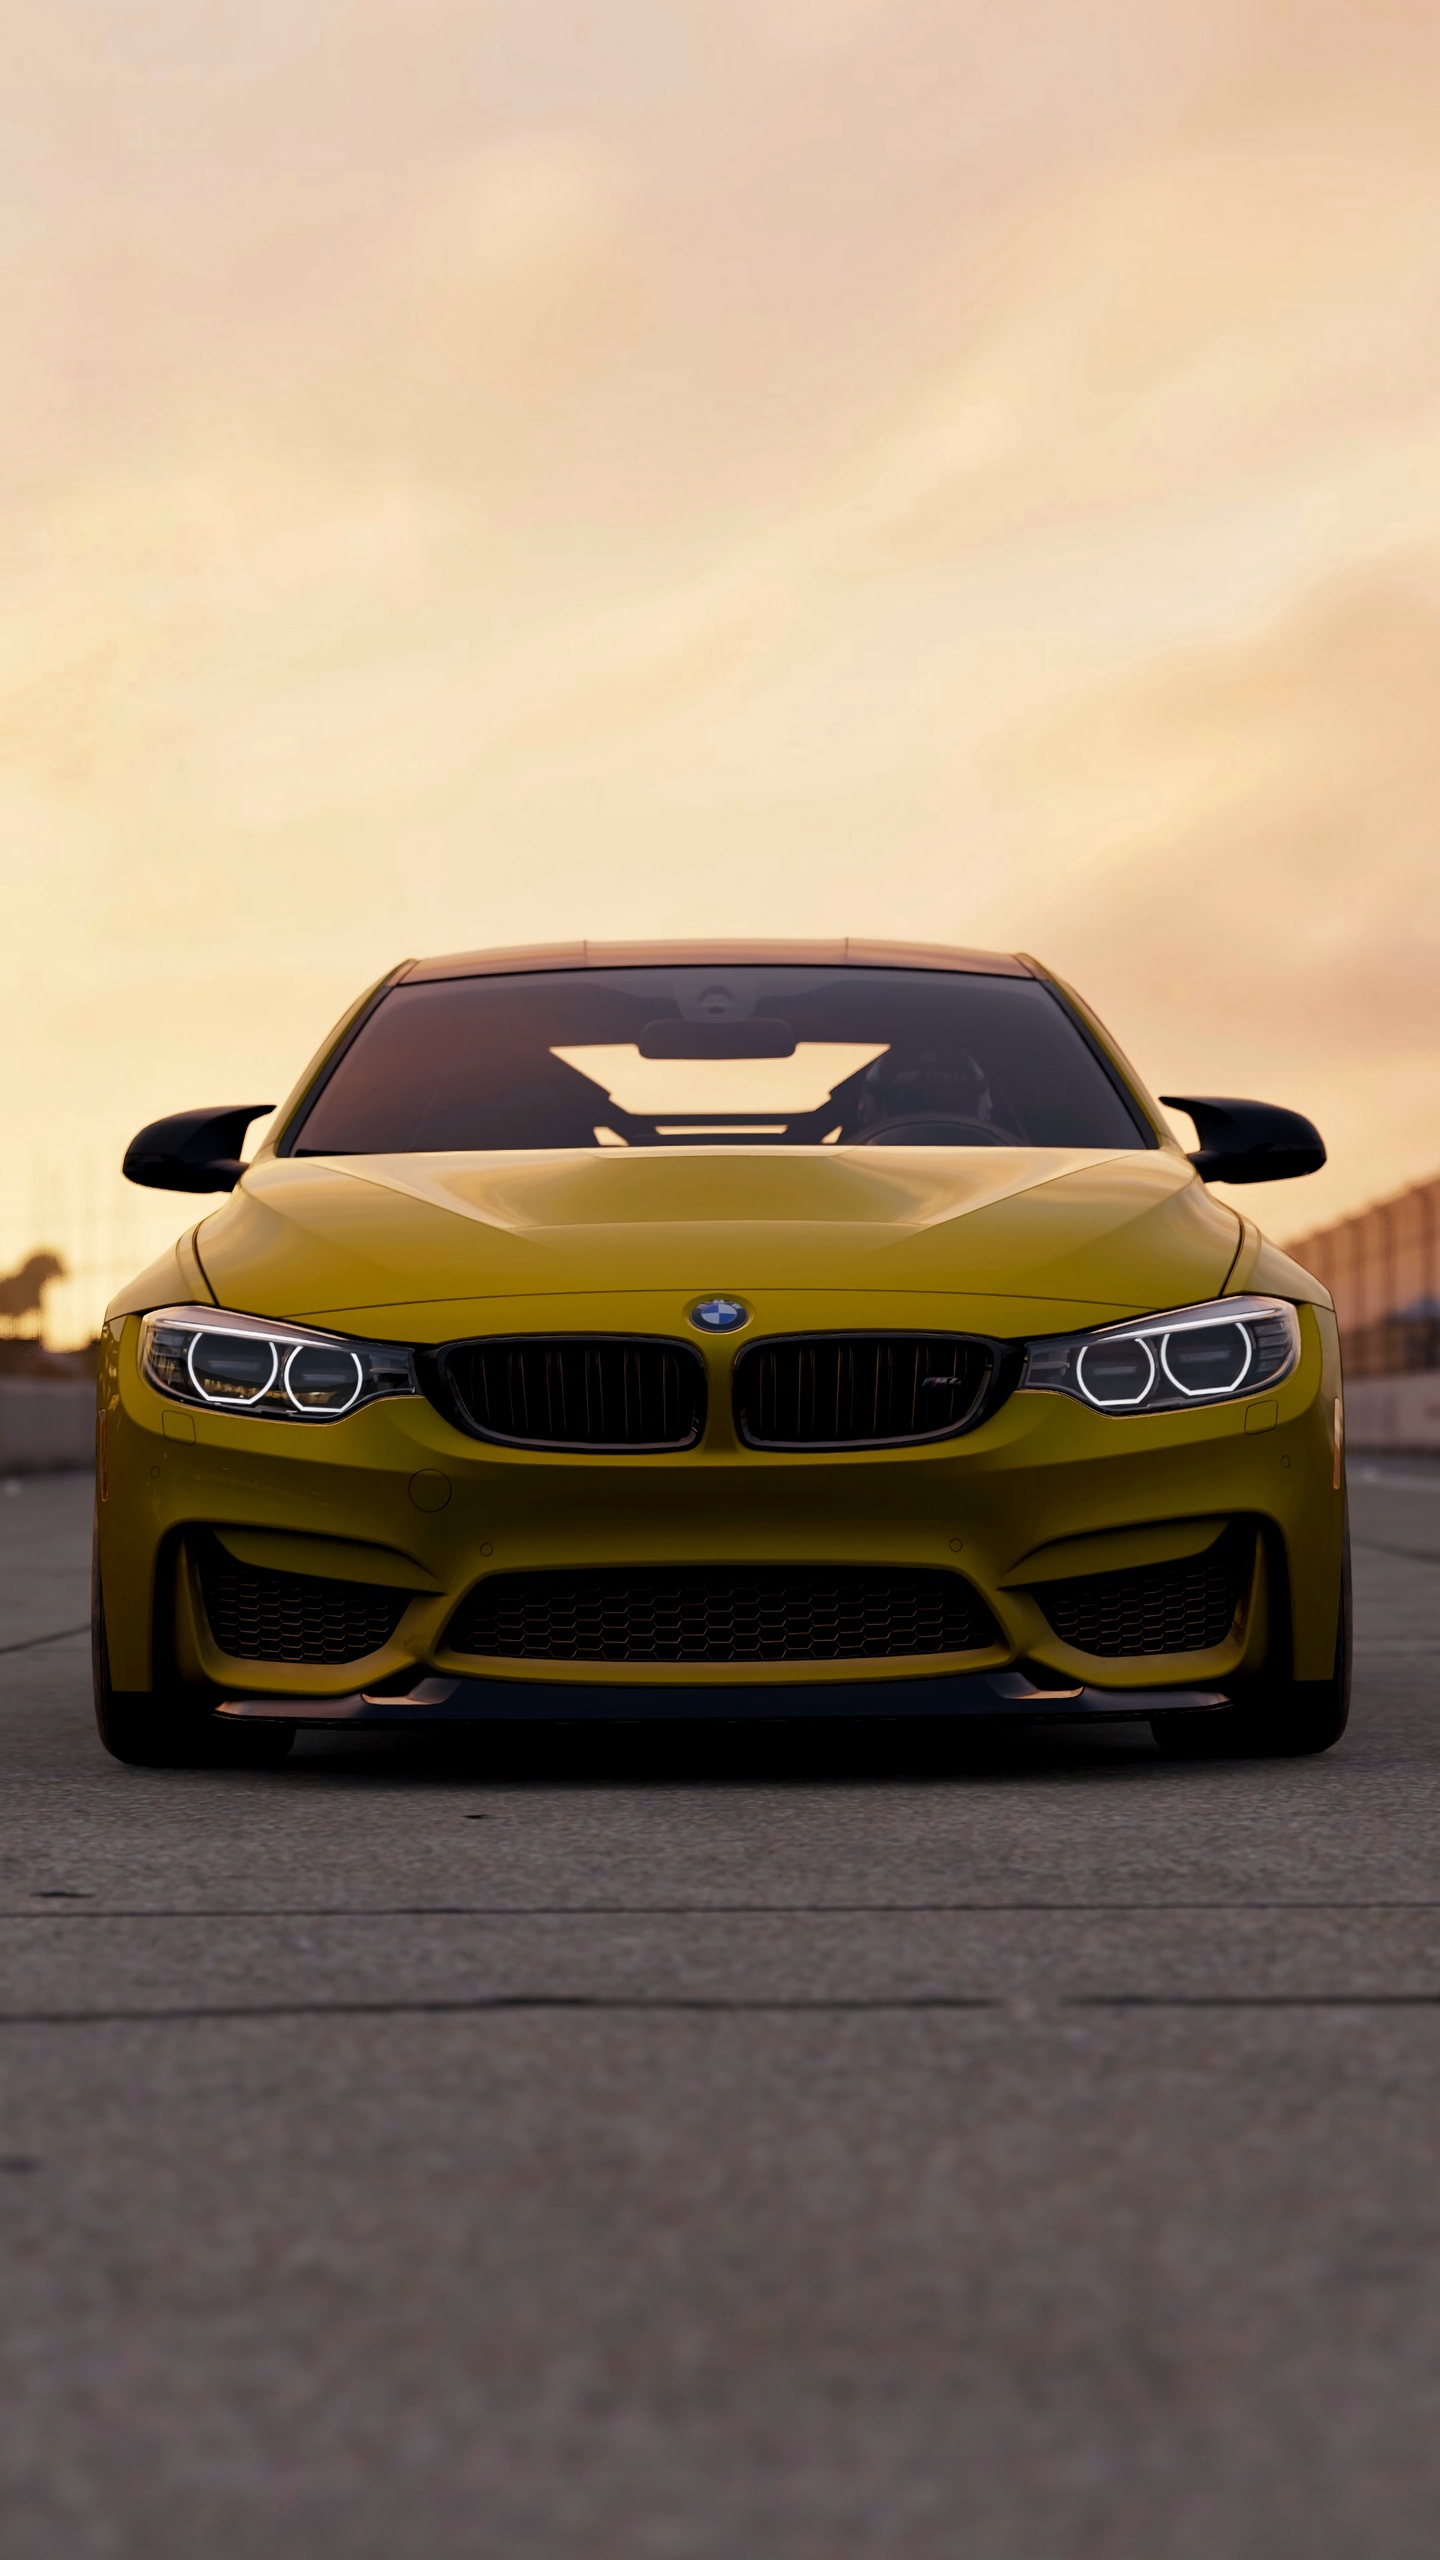 Bmw M3, Yellow, Front View, Luxury Cars - Bmw M4 Wallpaper Iphone - HD Wallpaper 